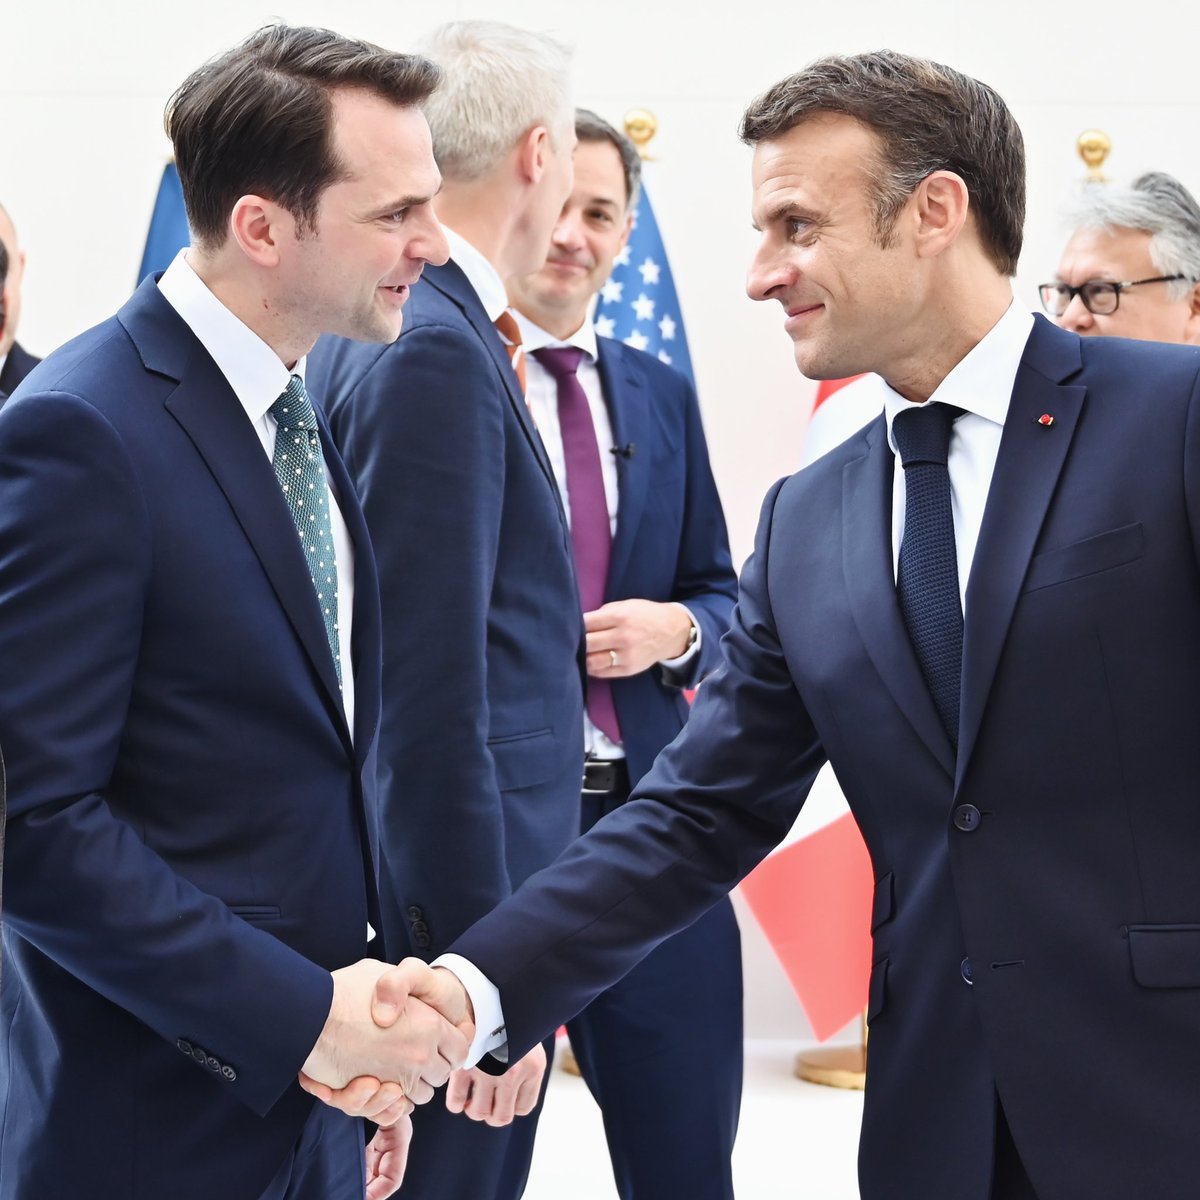 Thank you for the great teamwork on nuclear leadership 🇷🇴🇫🇷 @EmmanuelMacron #COP28